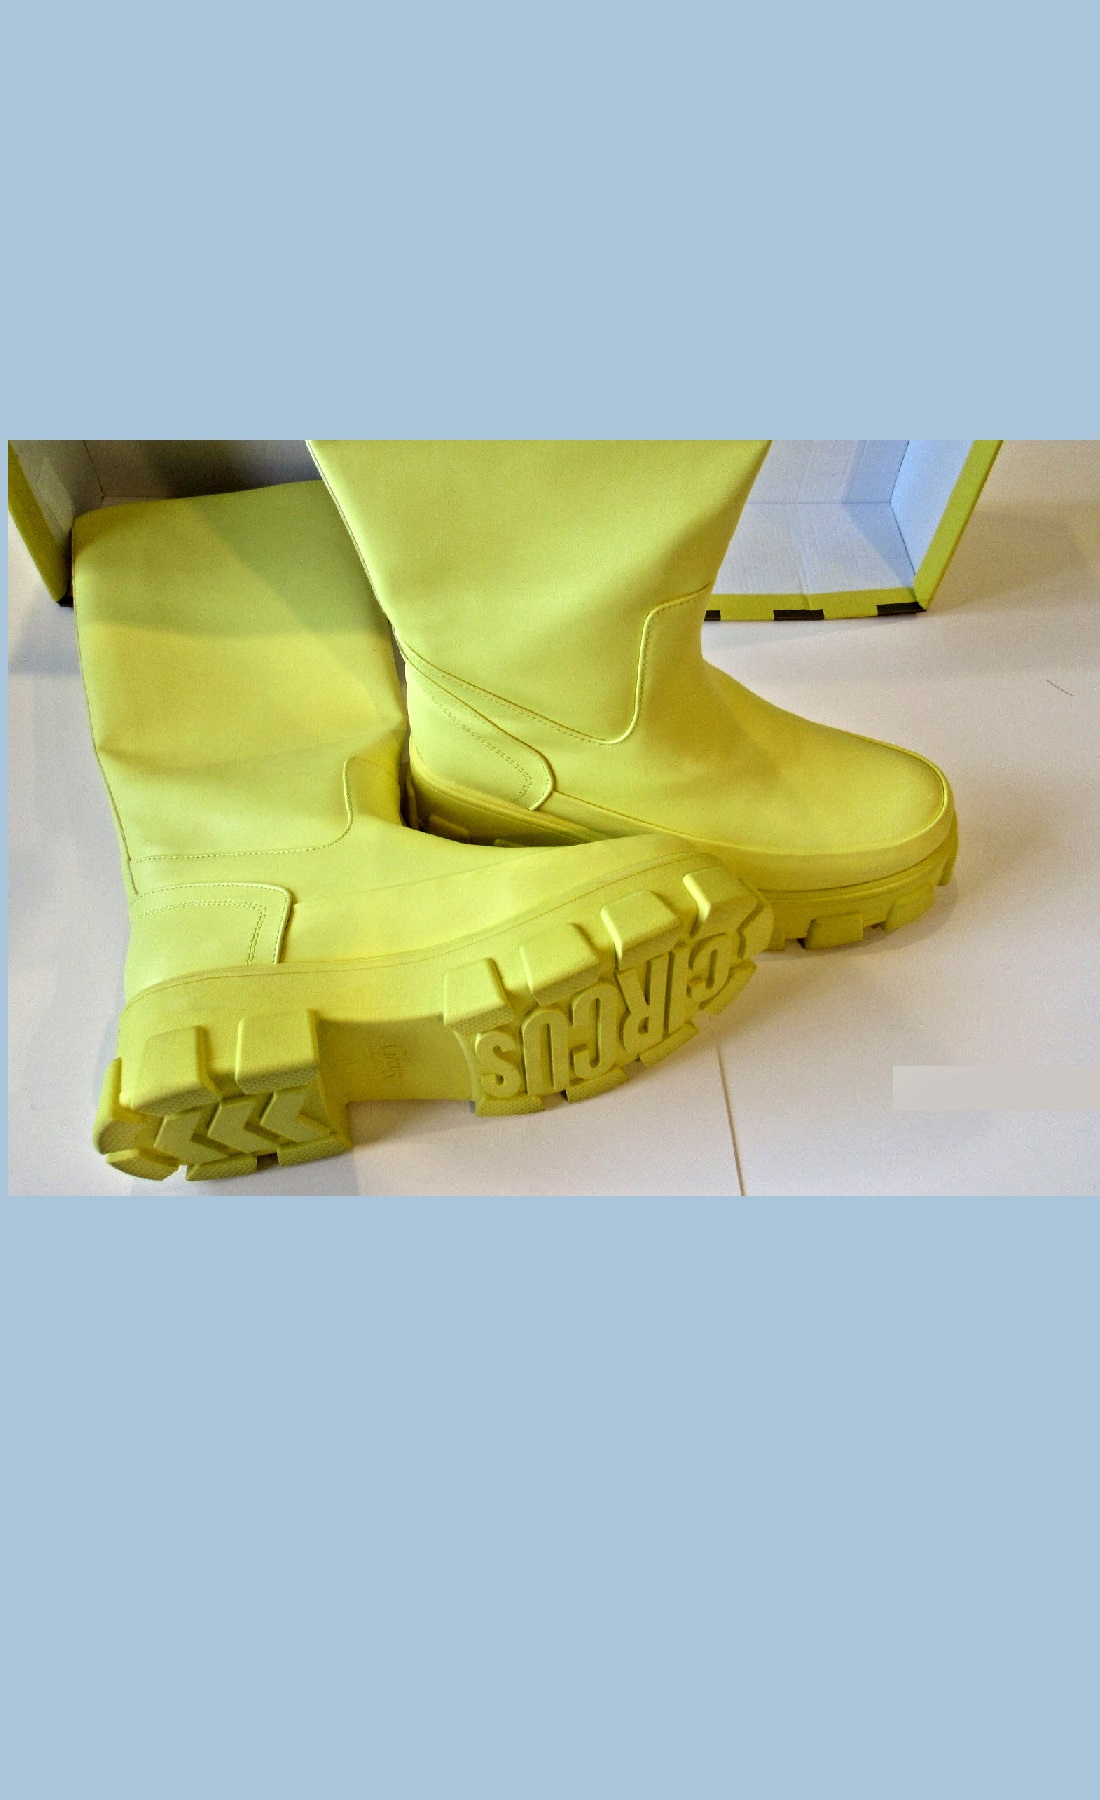 Women's Yellow Shoes With a Thick Sole